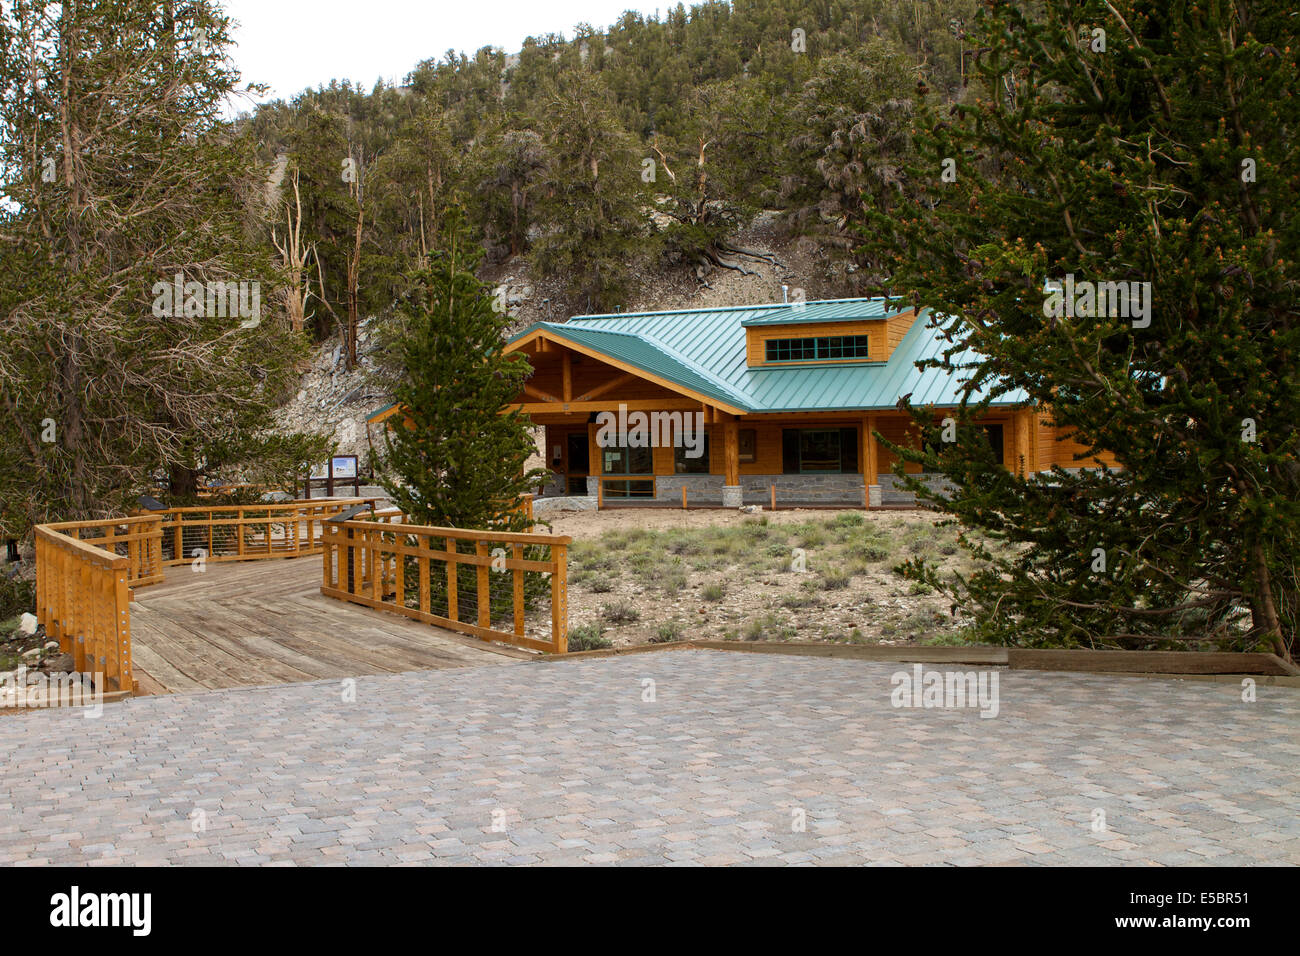 The schulman grove Ancient Bristlecone Pine Forest Visitor Center in the Inyo National forest California Stock Photo